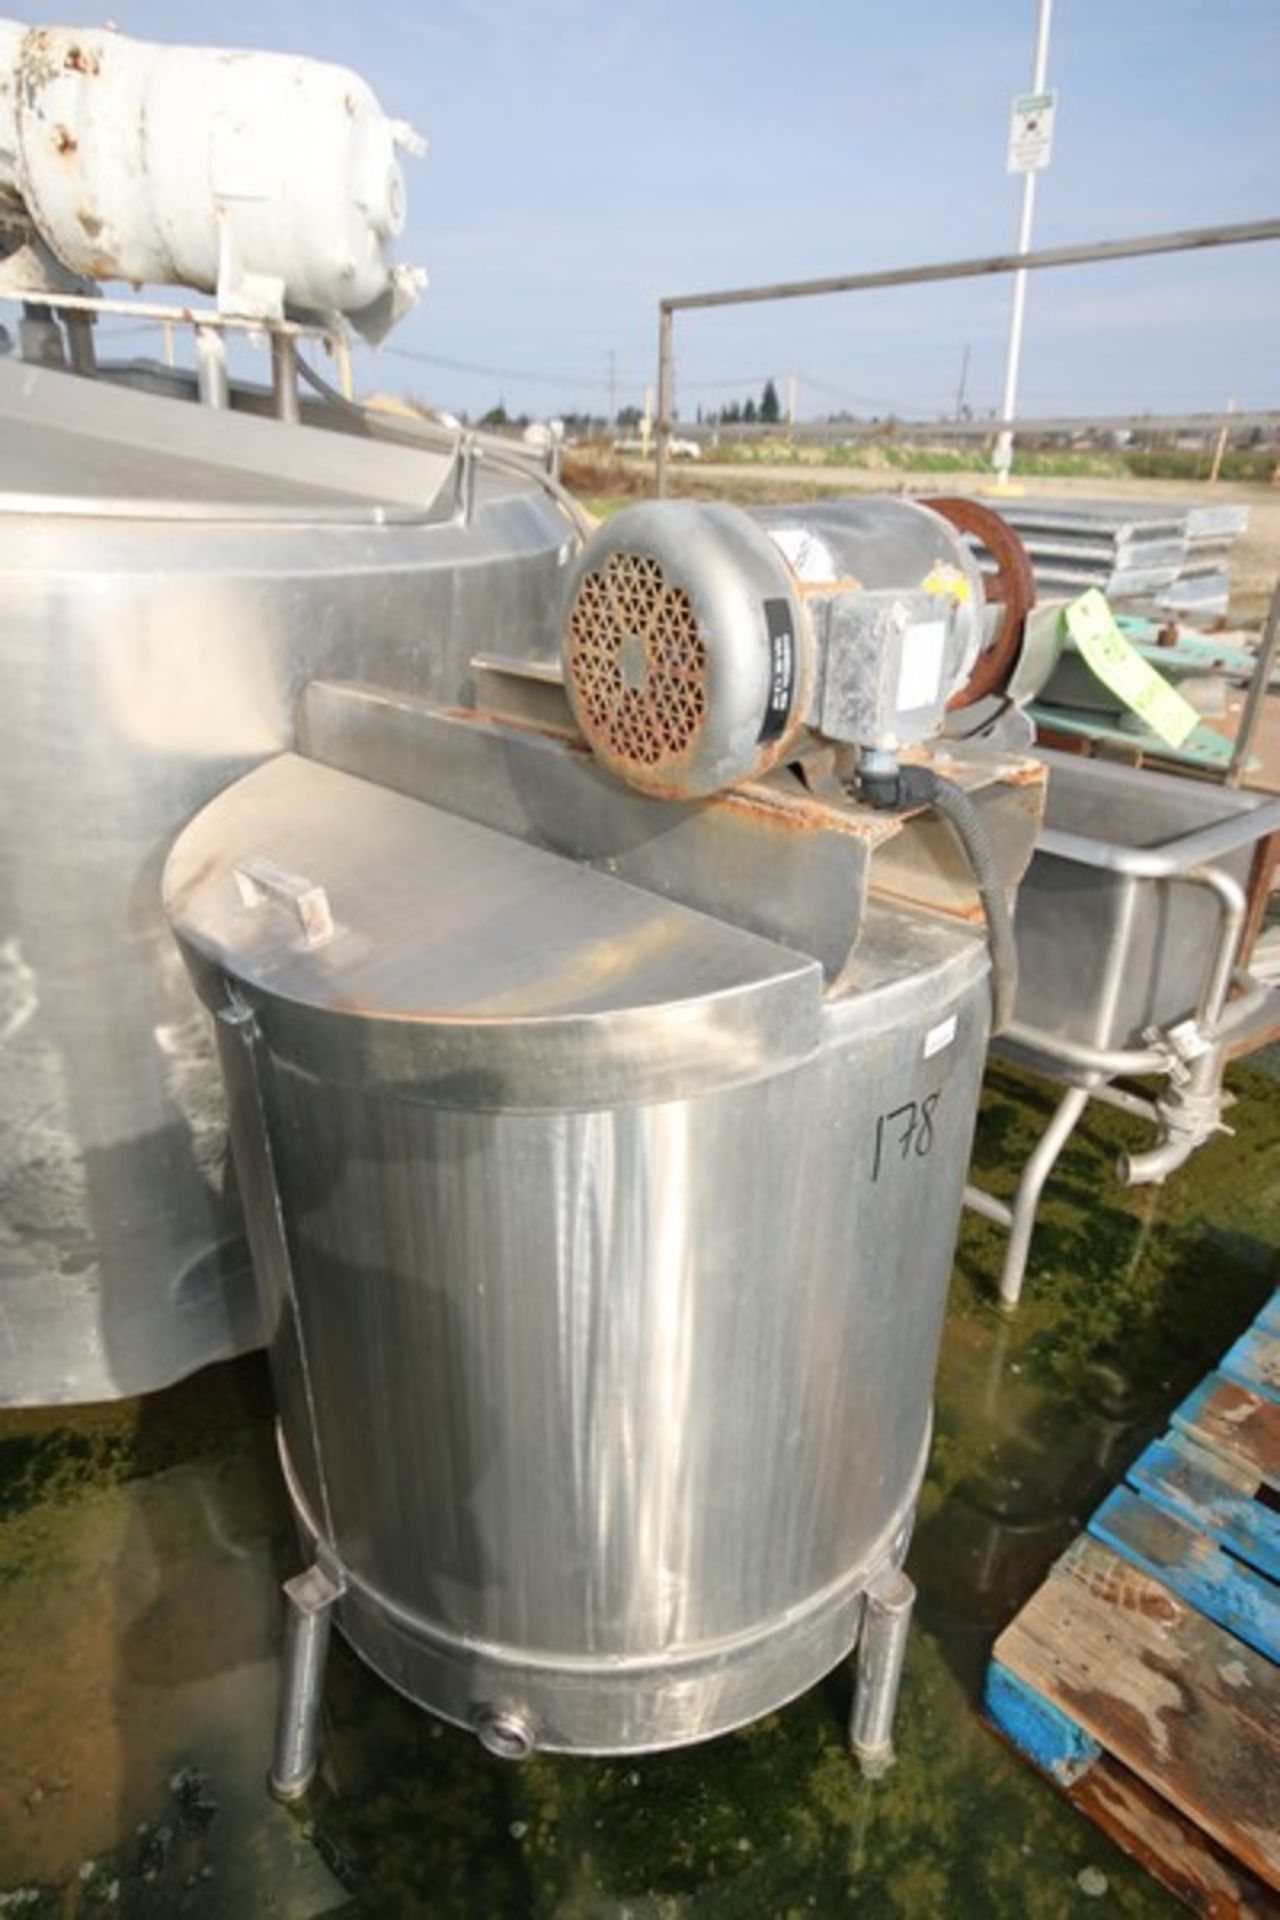 150 Gal. S/S Single Wall Mixing Tank, Tank Dims.: Aprox. 35" Dia. X 36" Tall, with Top Mounted Motor - Image 3 of 3